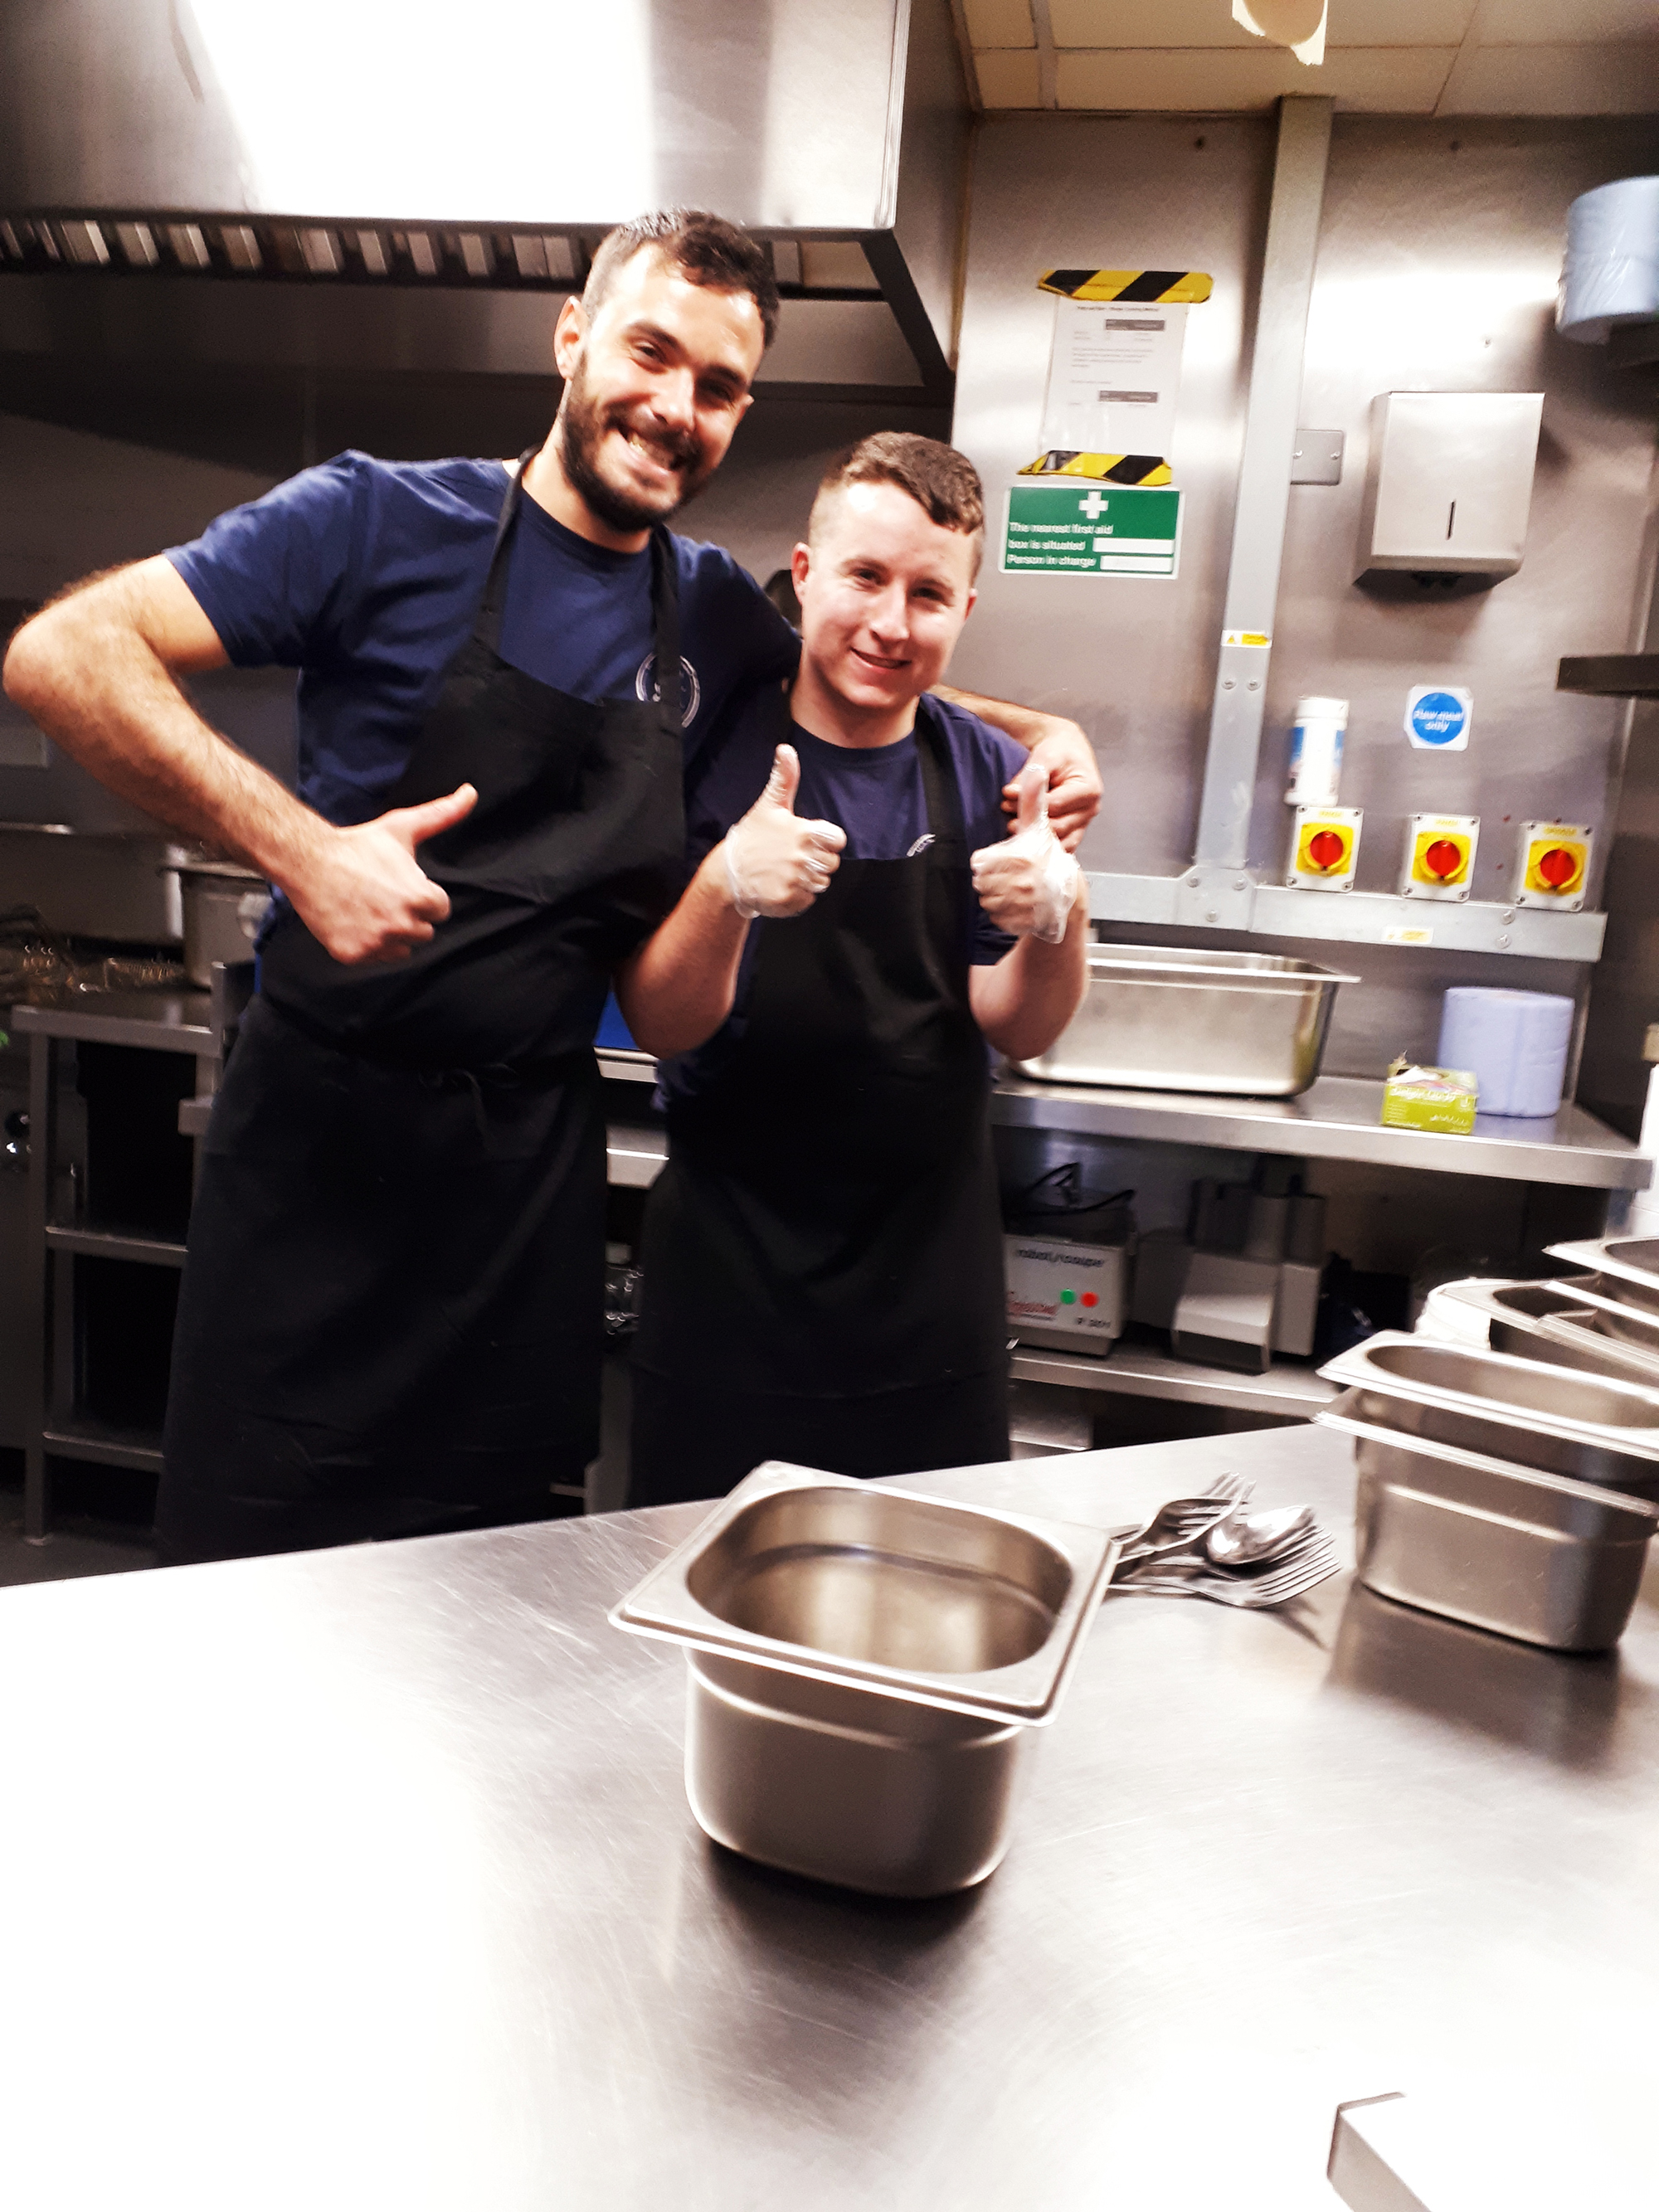 Young man and his coworker in a kitchen giving thumbs up